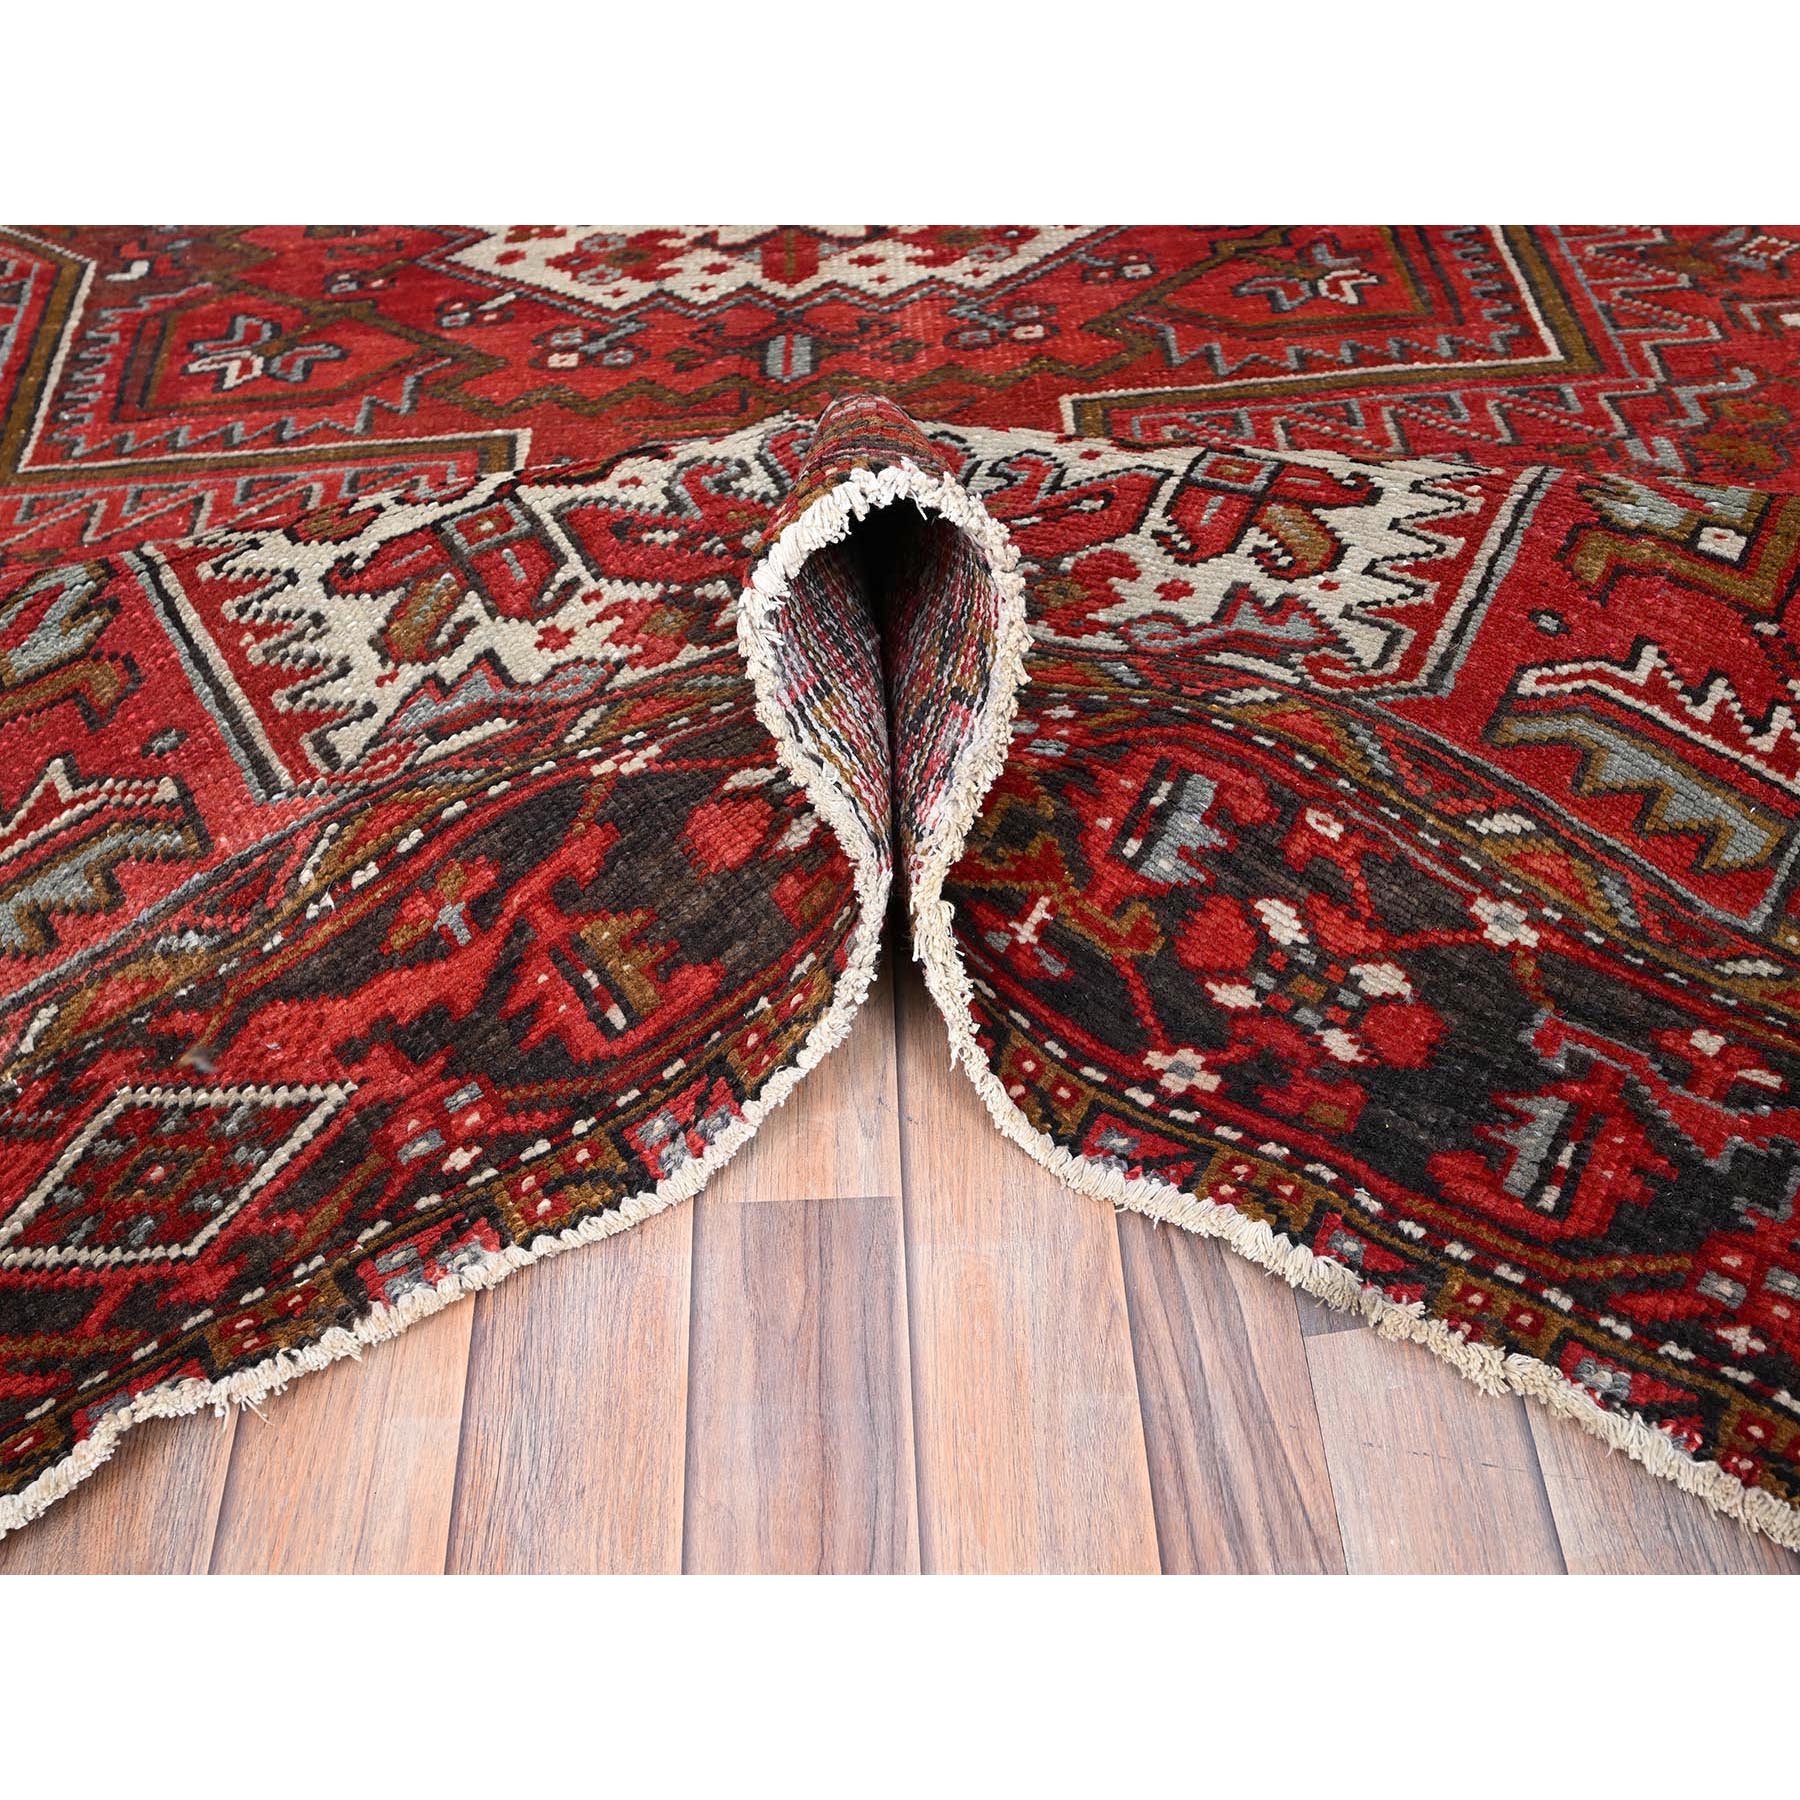 7'5"x10'2" Fire Brick Red, Vintage Persian Heriz with Village Motif, Good Condition, Distressed Look, Pure Wool, Hand Woven, Oriental Rug 